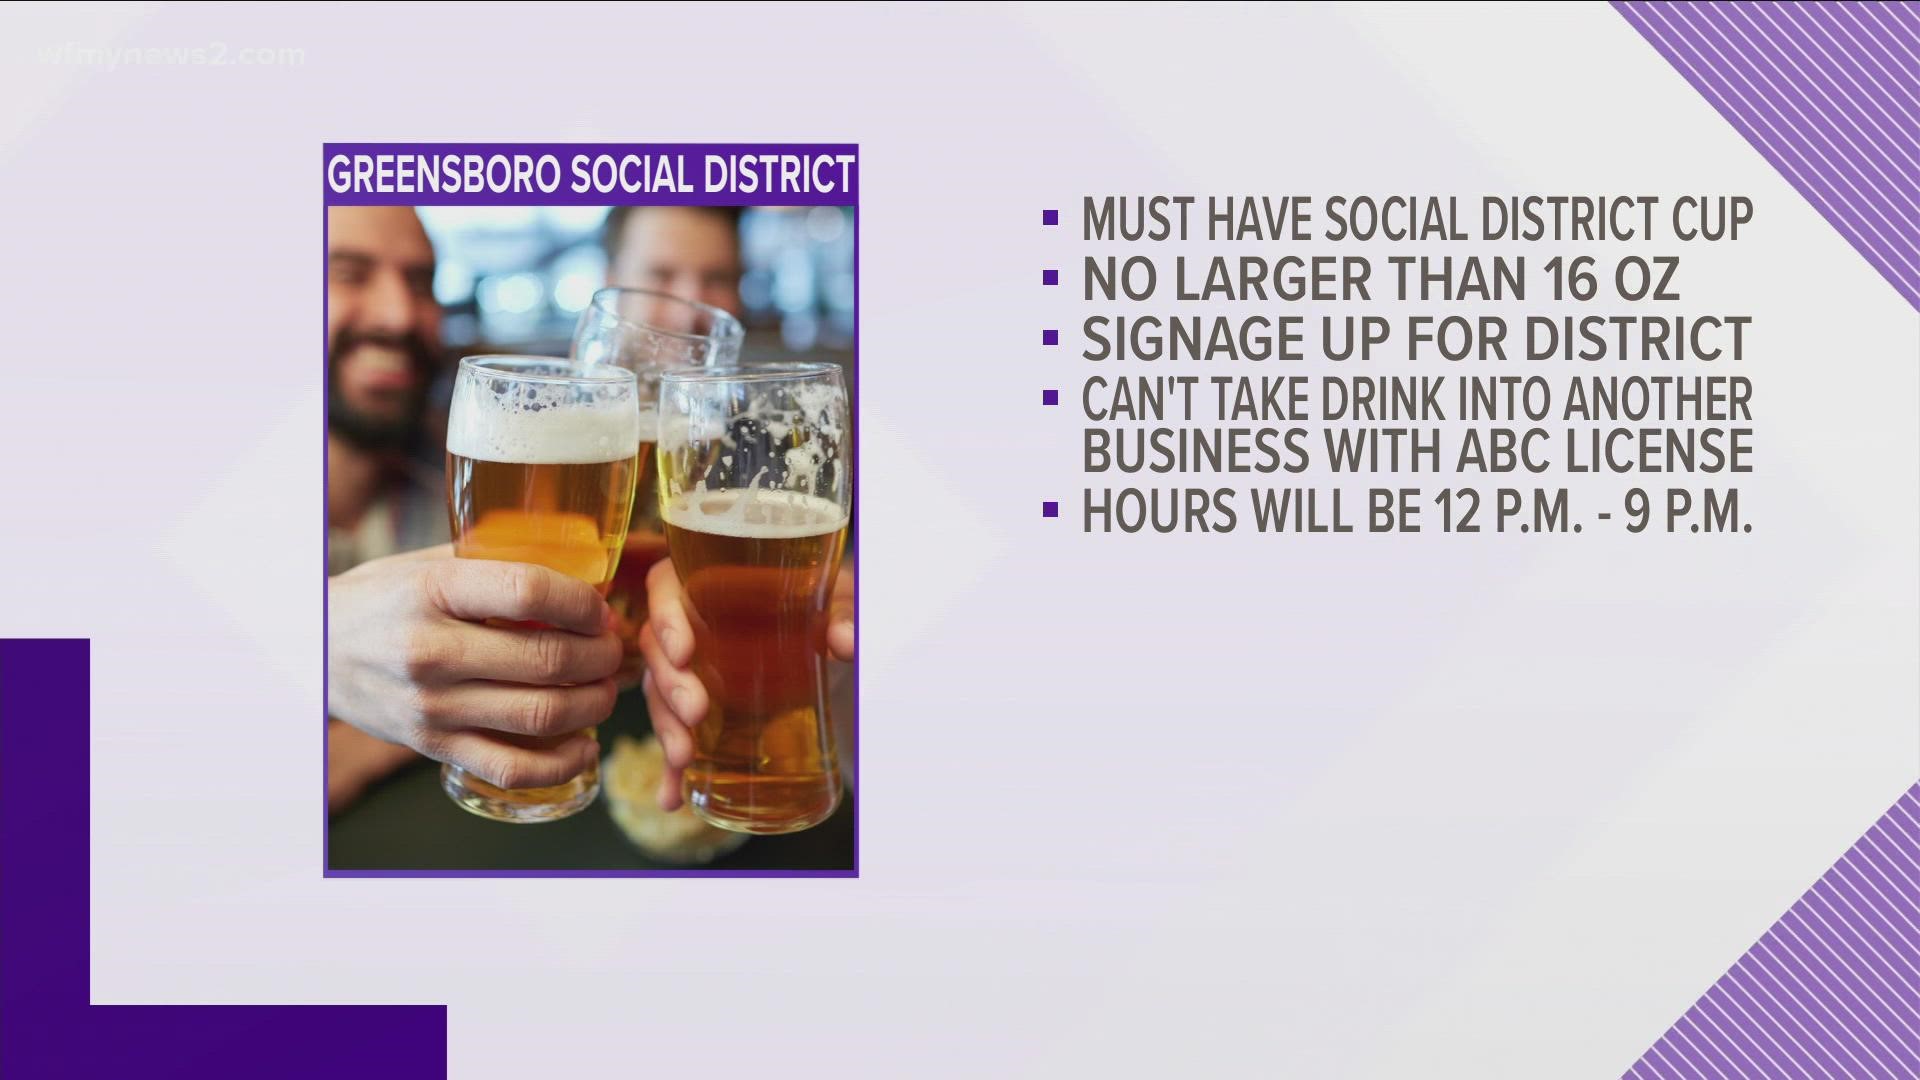 Downtown Greensboro will get a new social district, allowing patrons to take their alcoholic beverages on the go.